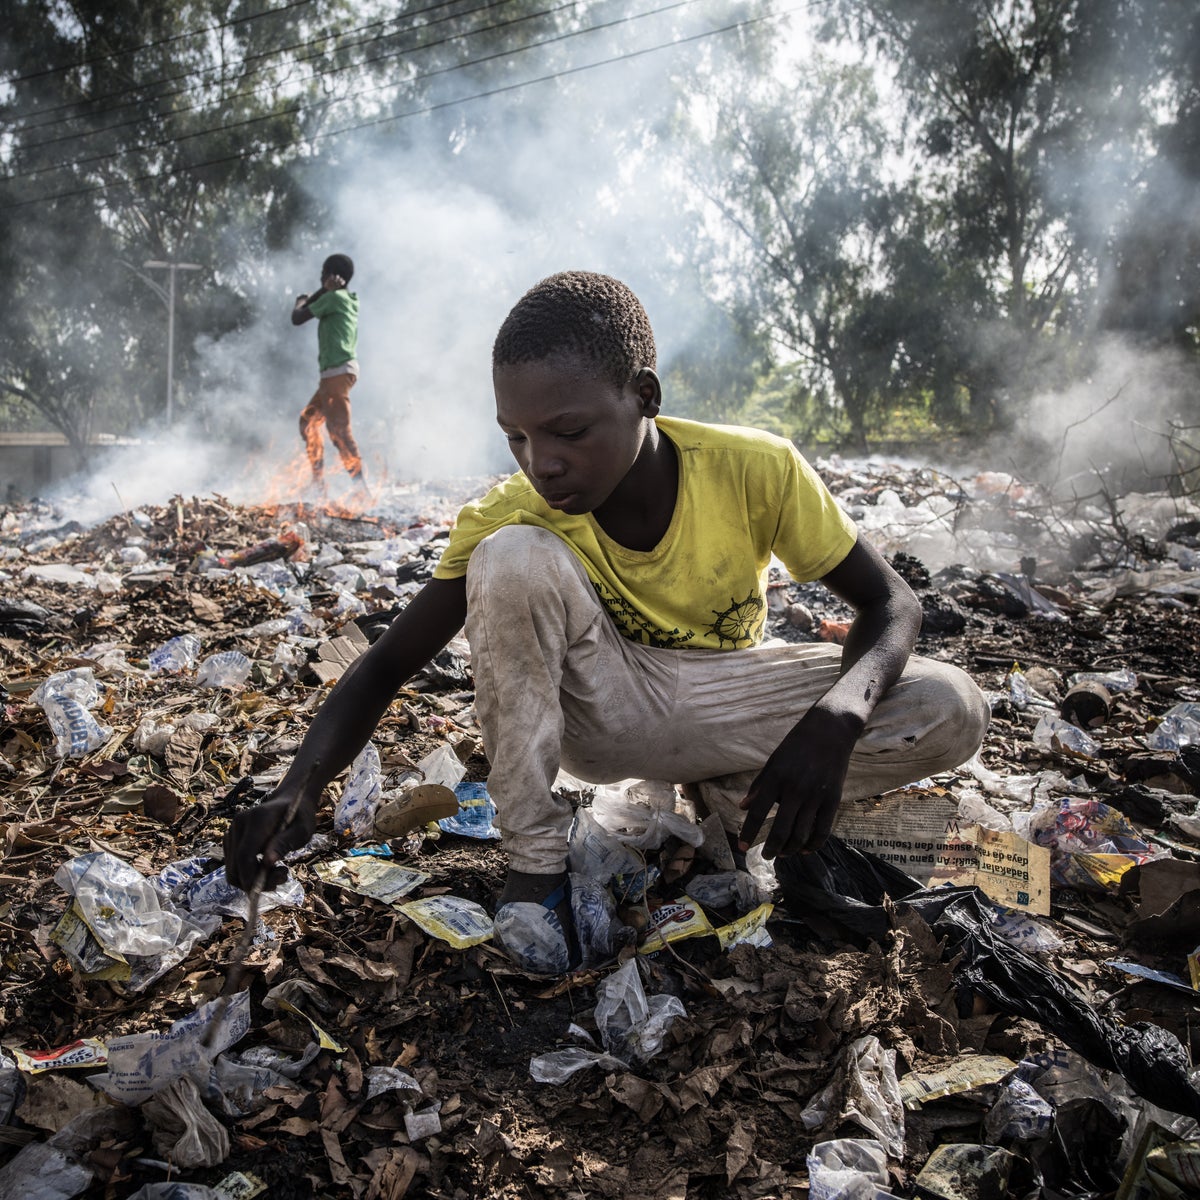 Teenager wearing a yellow shirt digs through burning rubbish dump for saleable items.